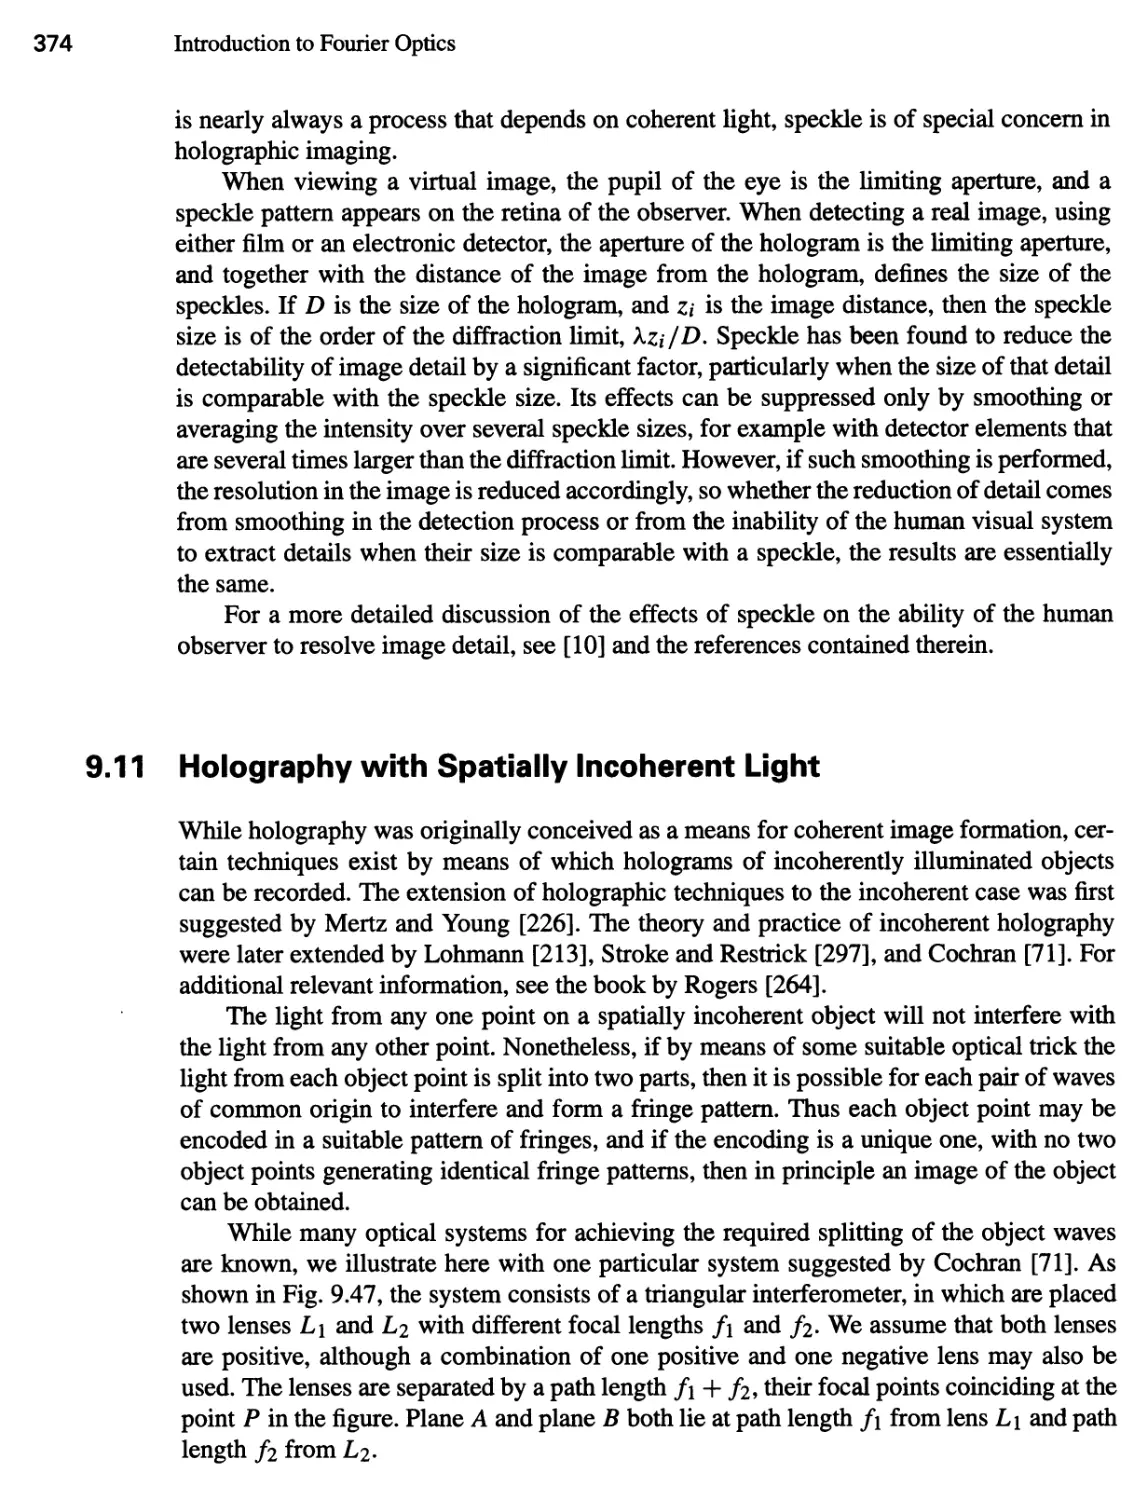 9.11 Holography with Spatially Incoherent Light 374